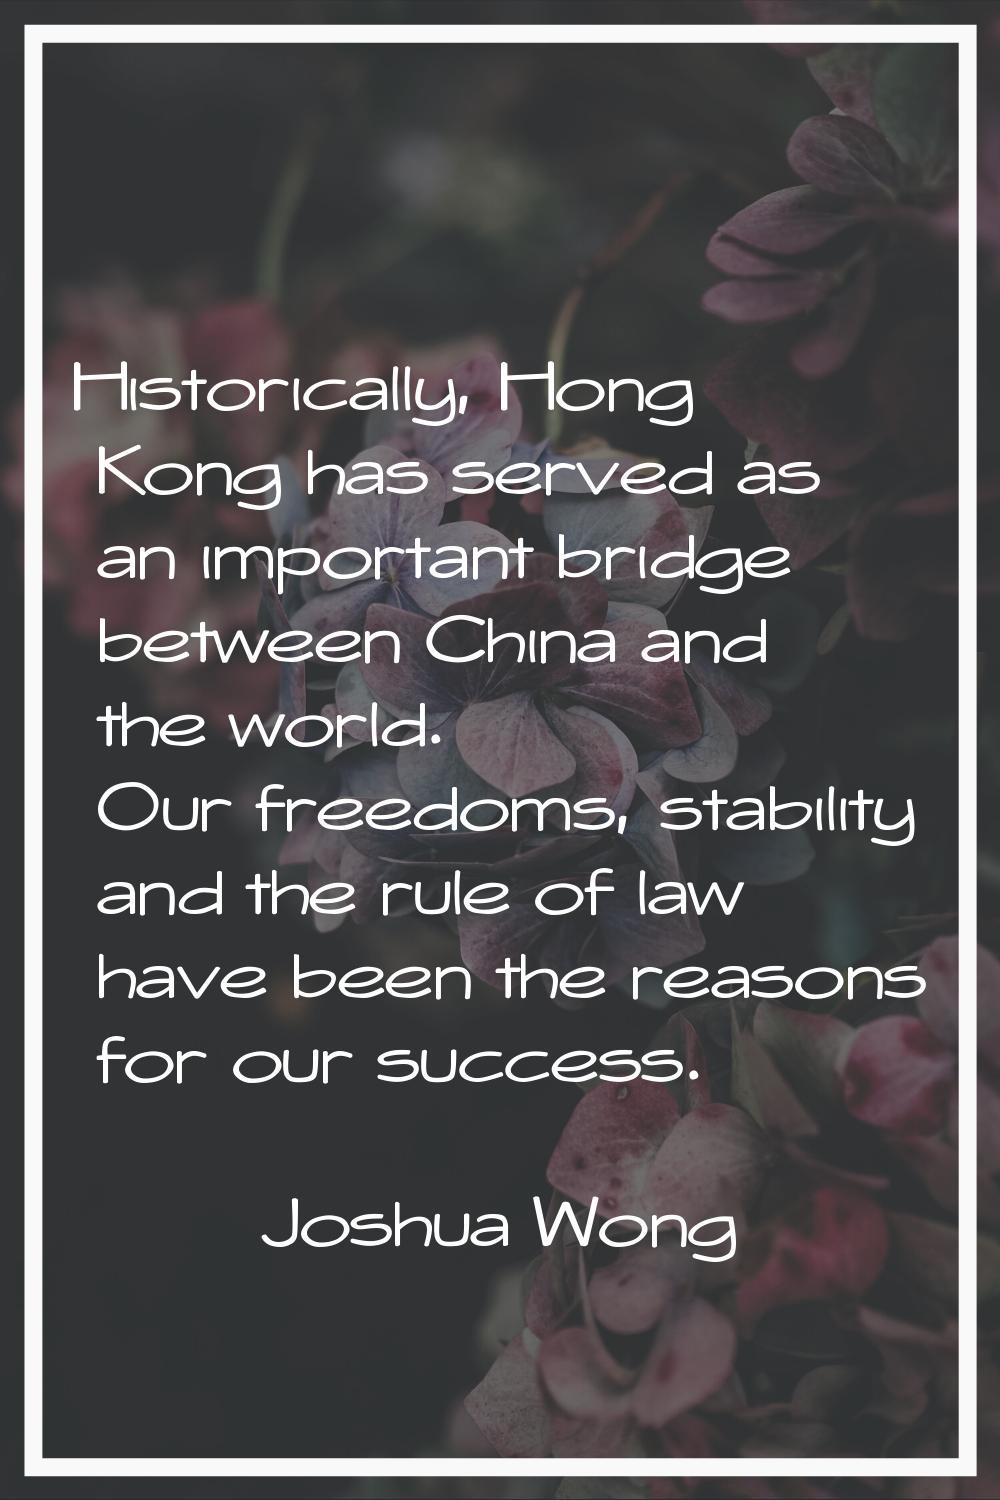 Historically, Hong Kong has served as an important bridge between China and the world. Our freedoms